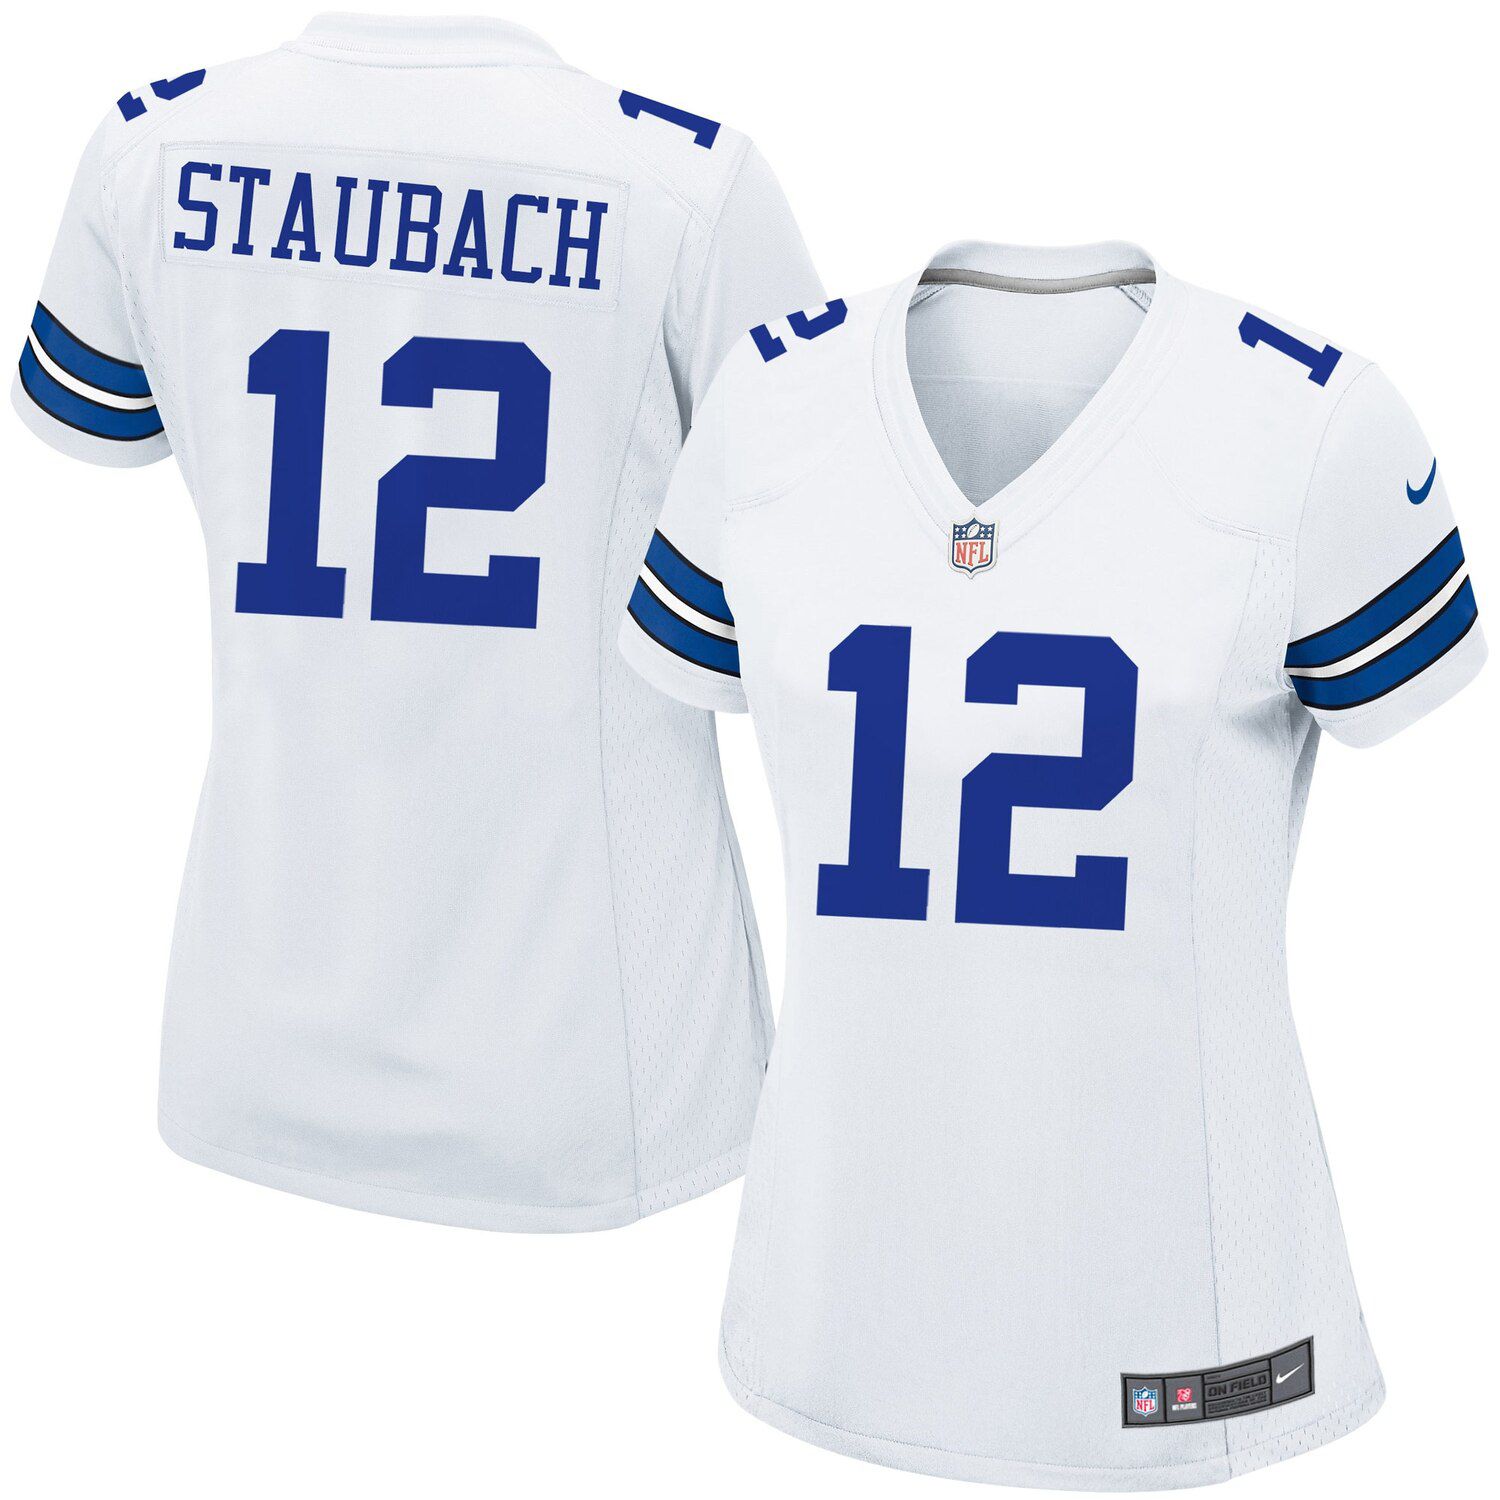 roger staubach jersey number